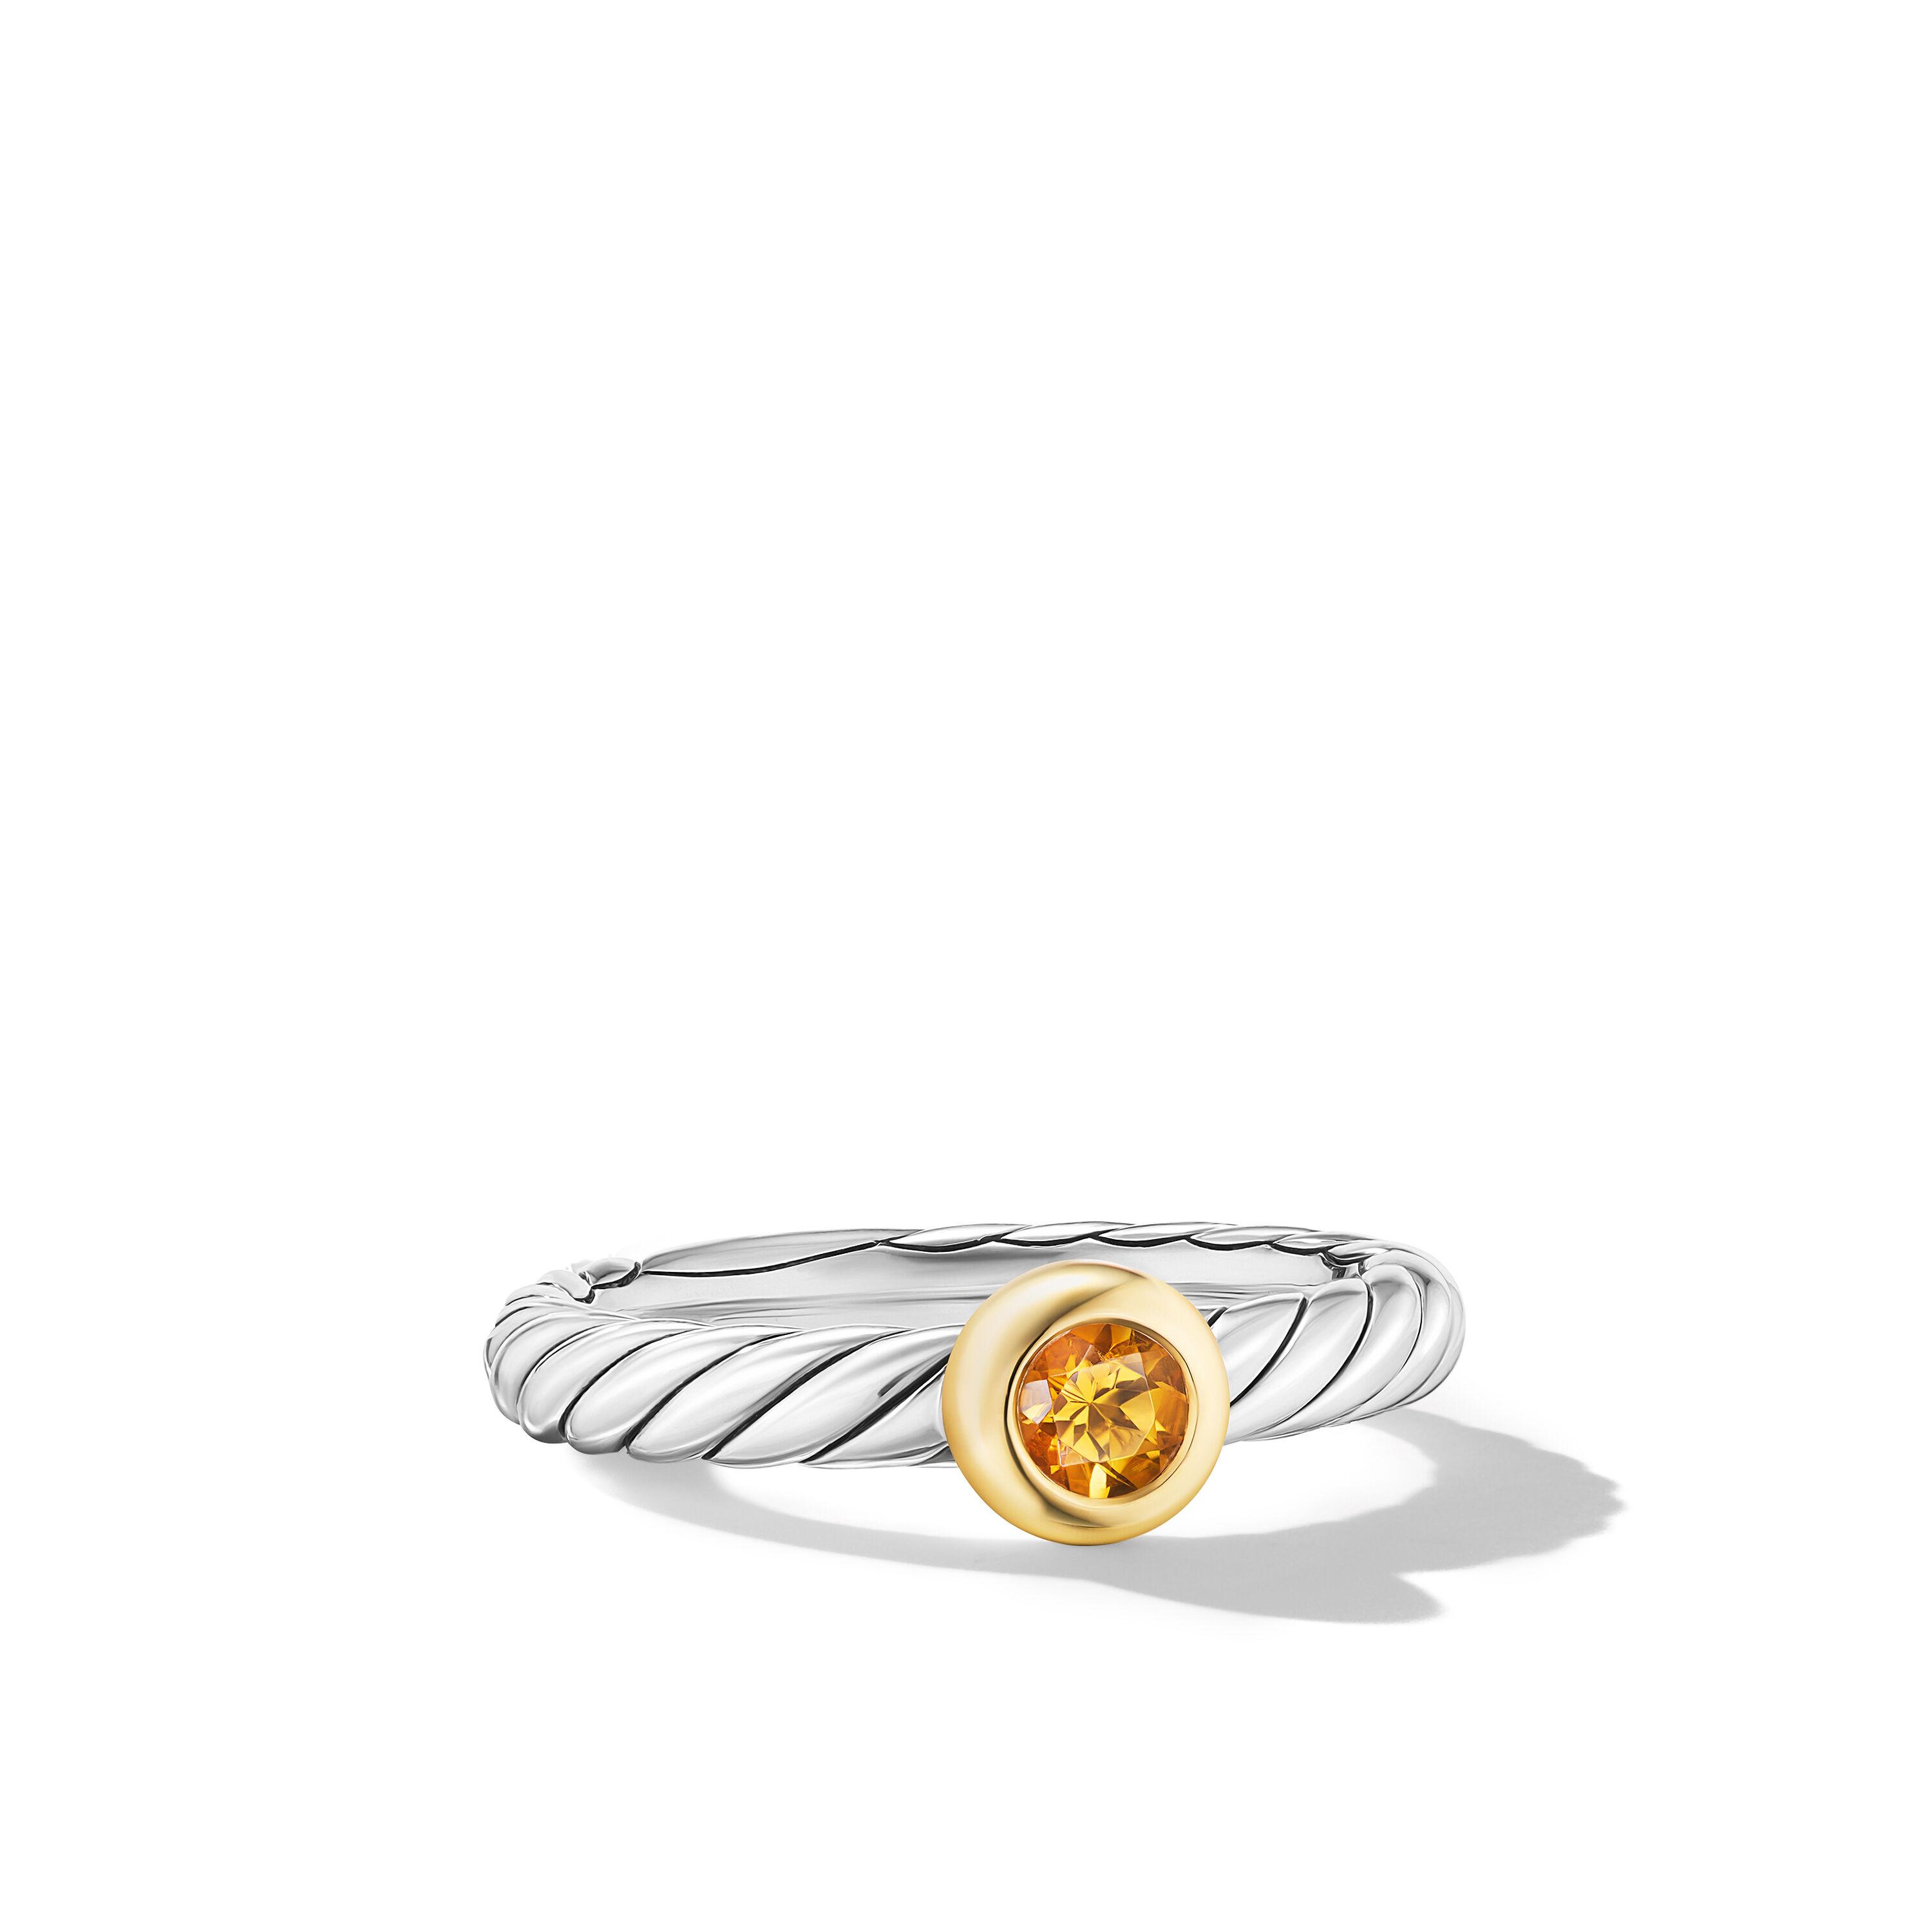 David Yurman Petite Cable Ring in Sterling Silver with 14K Yellow Gold and Citrine, Size 7